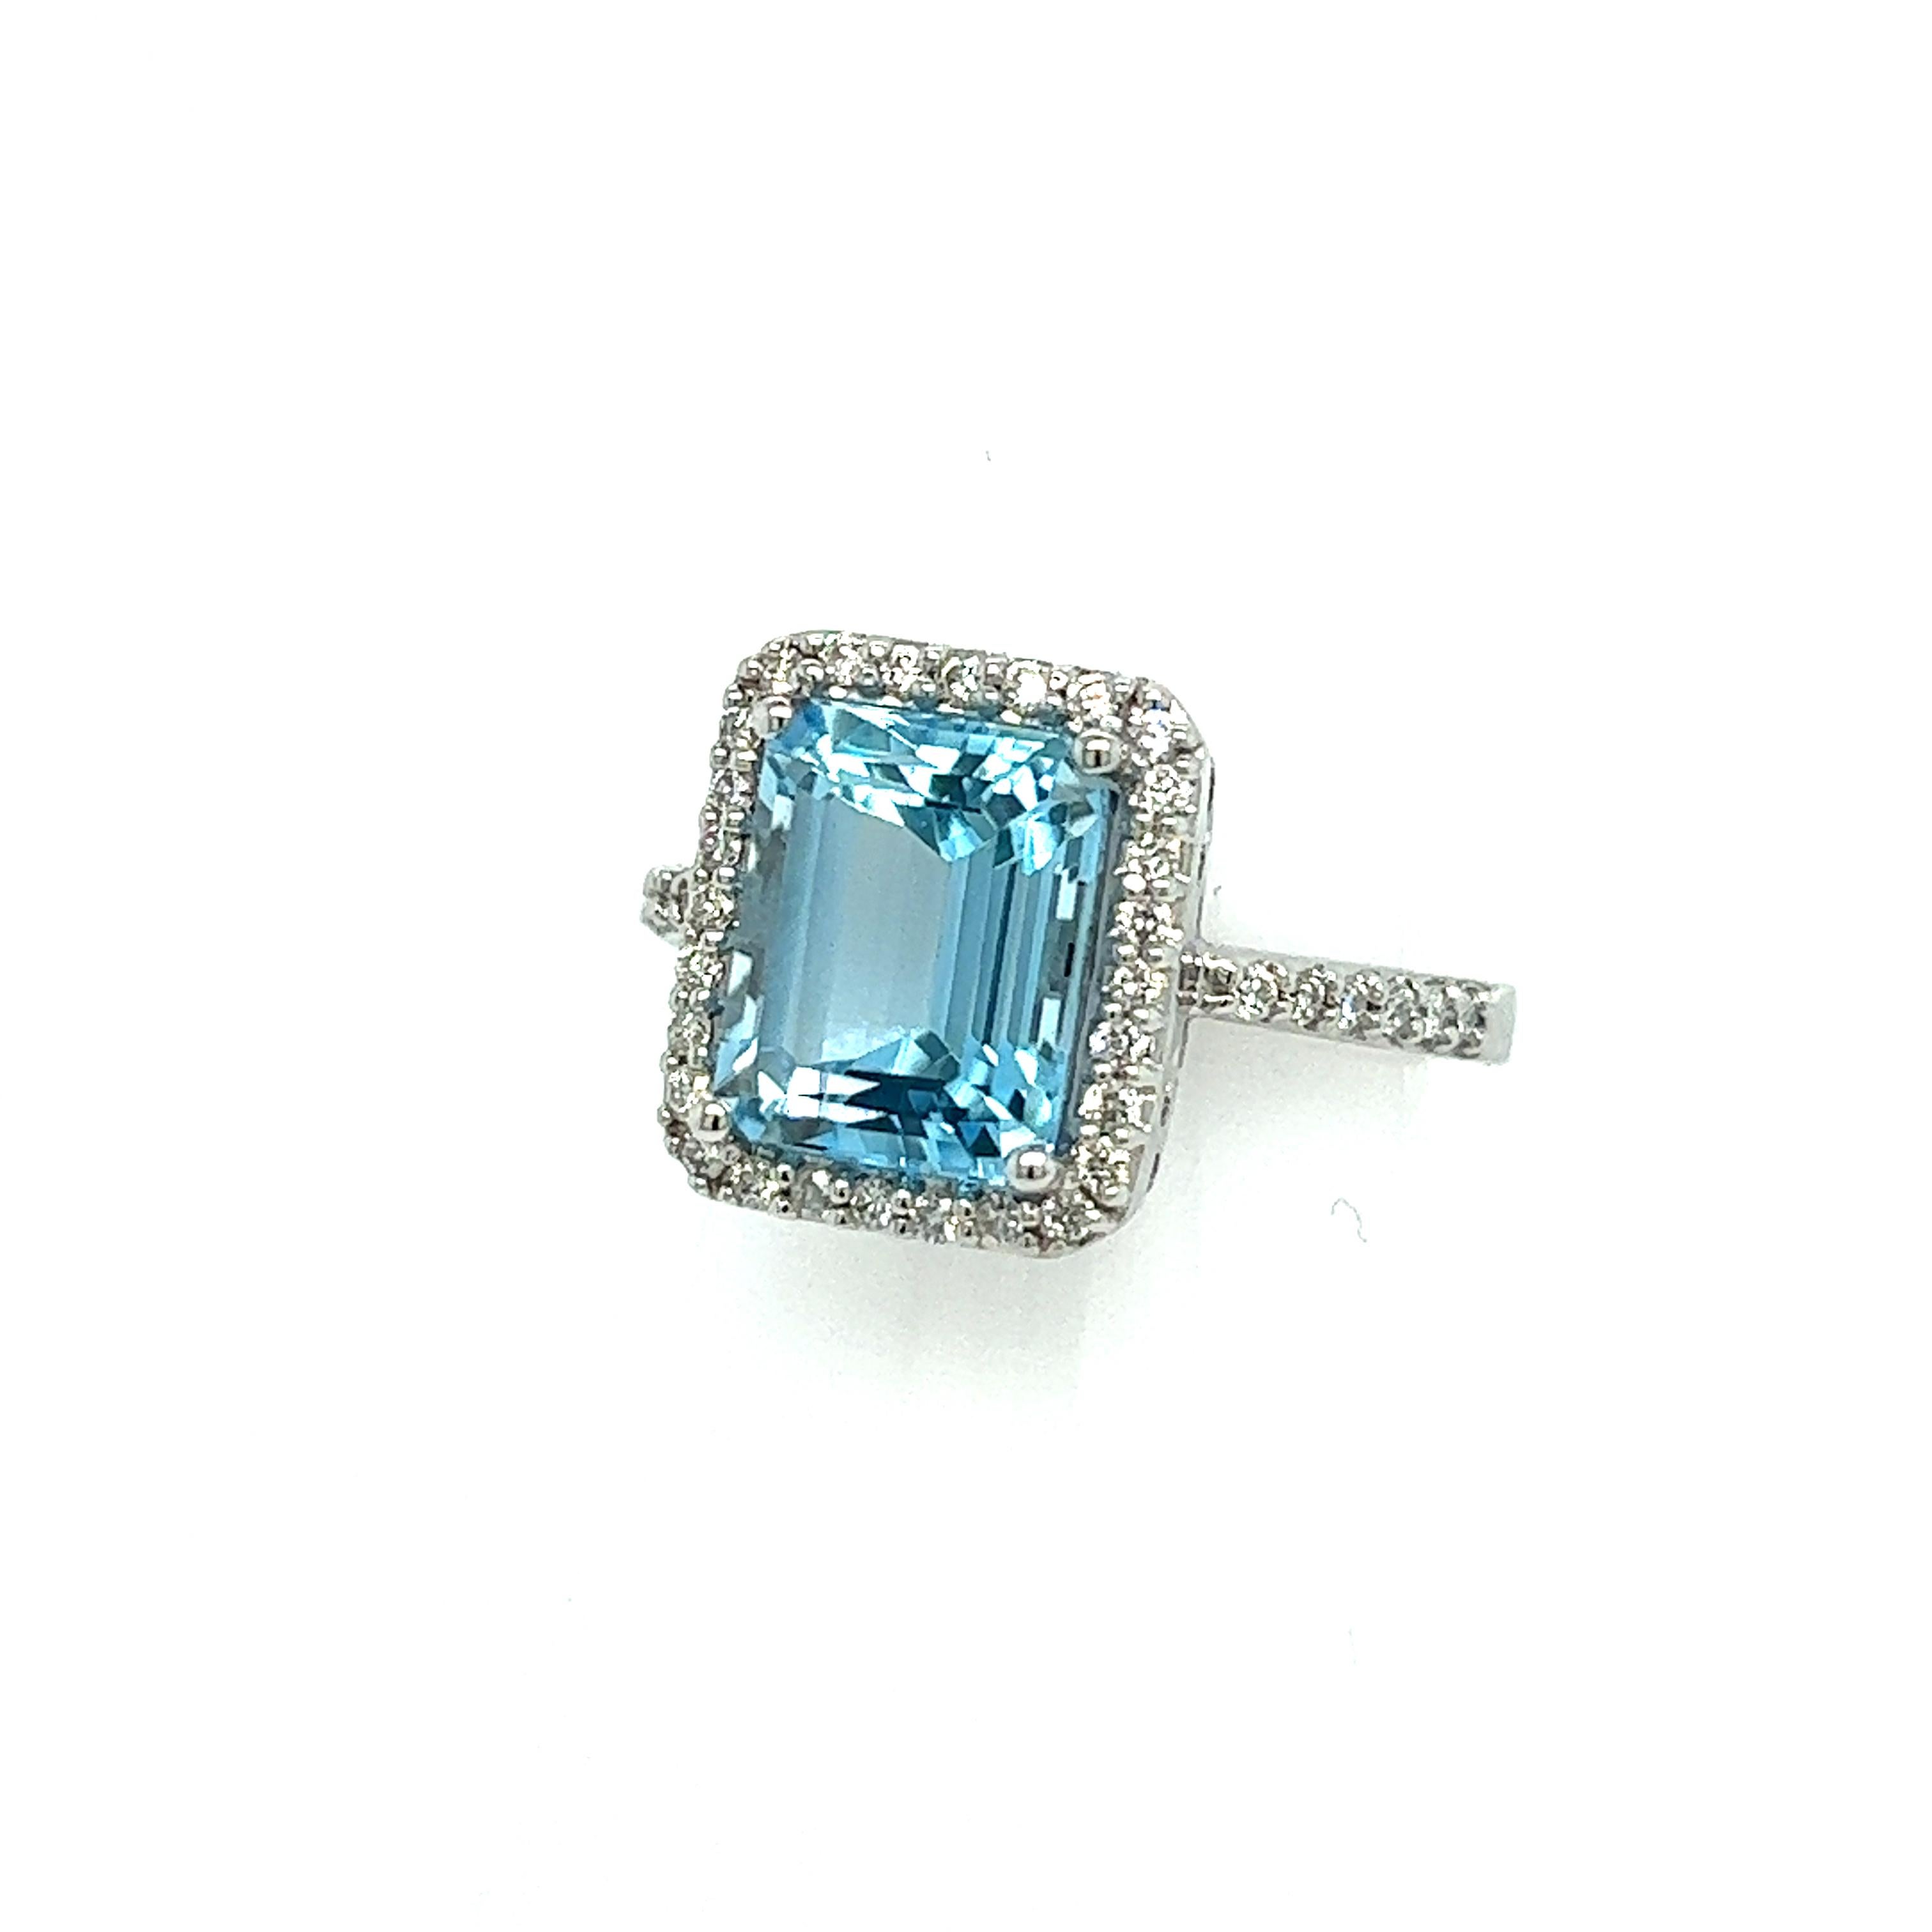 Natural Topaz Diamond Ring 6.5 14k W Gold 5.1 TCW Certified For Sale 1